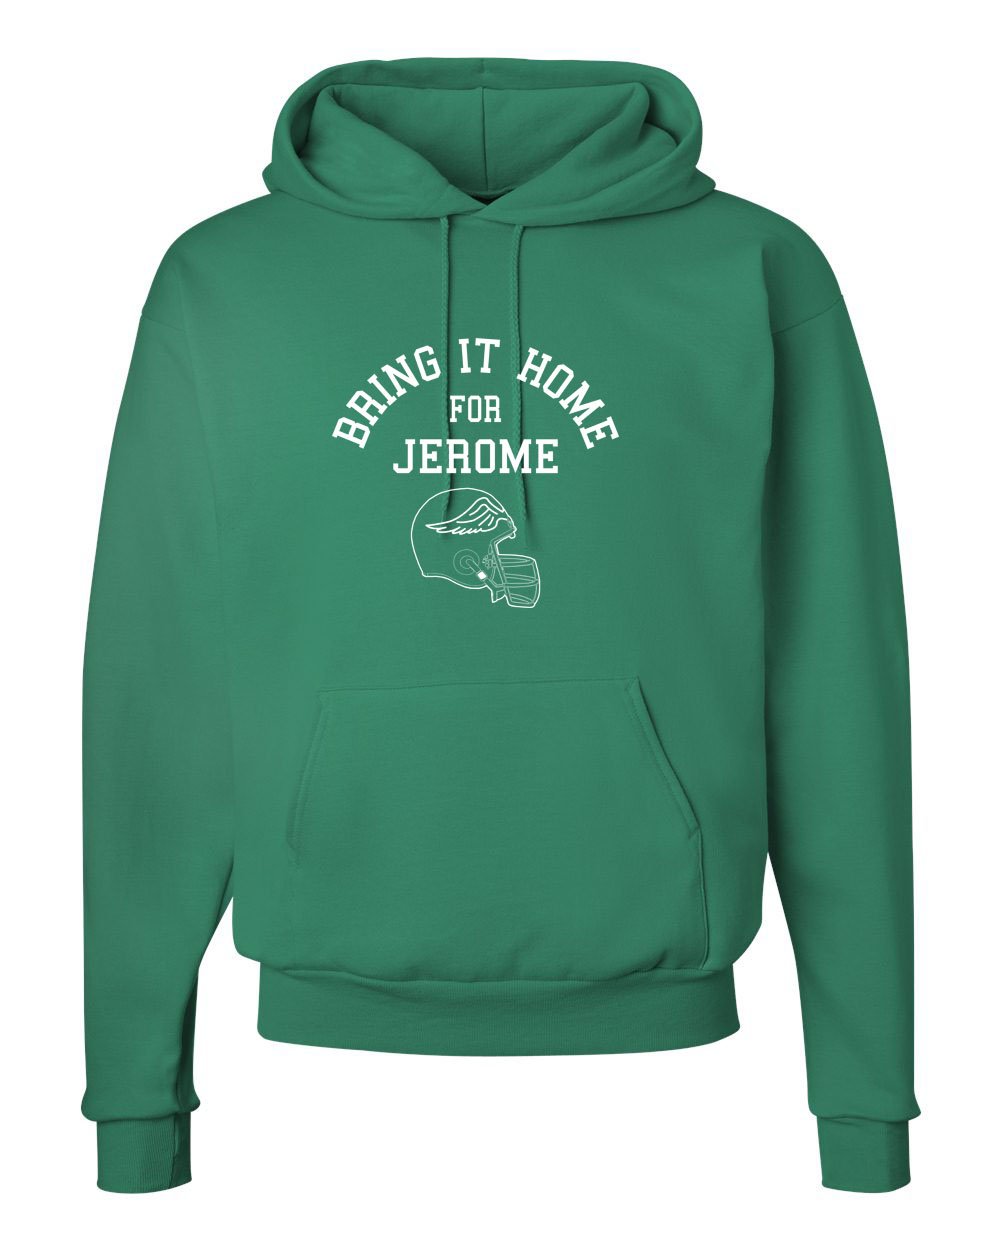 Bring It Home For Jerome Hoodie